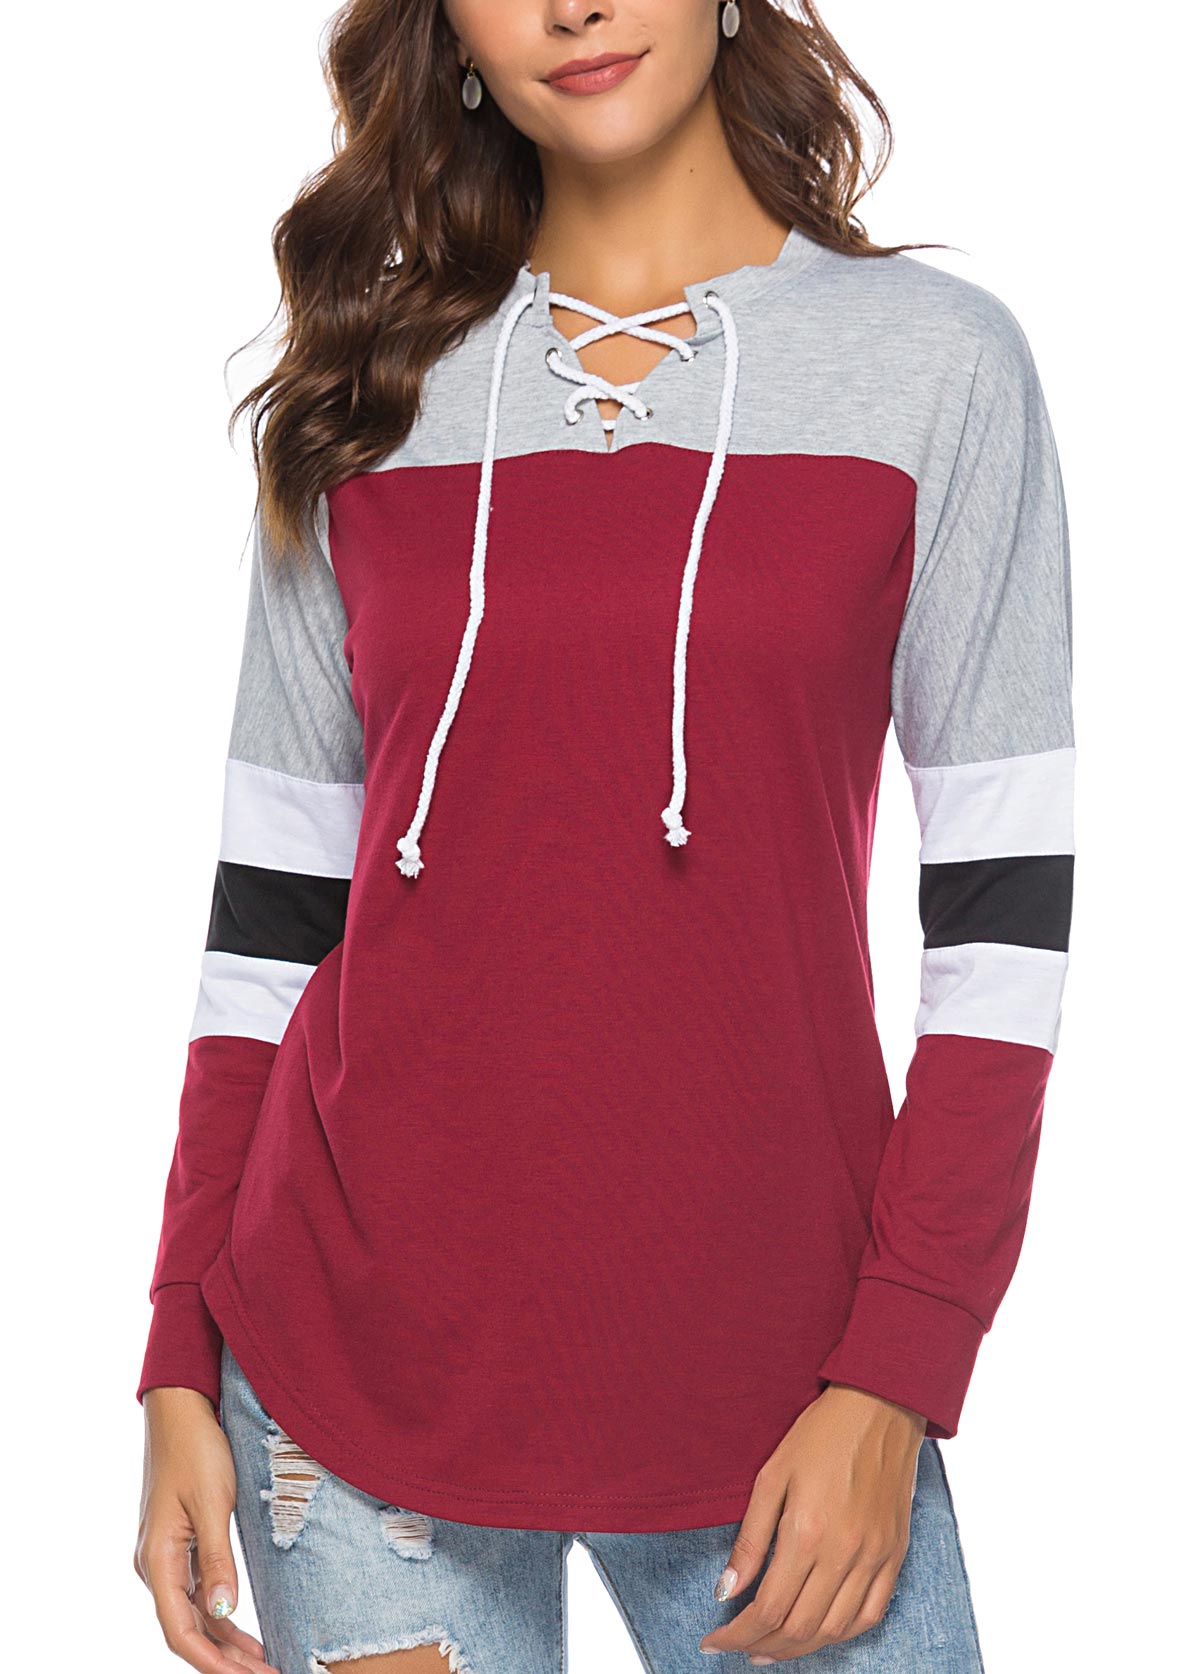 Lace Up Wine Red Long Sleeve Contrast T Shirt